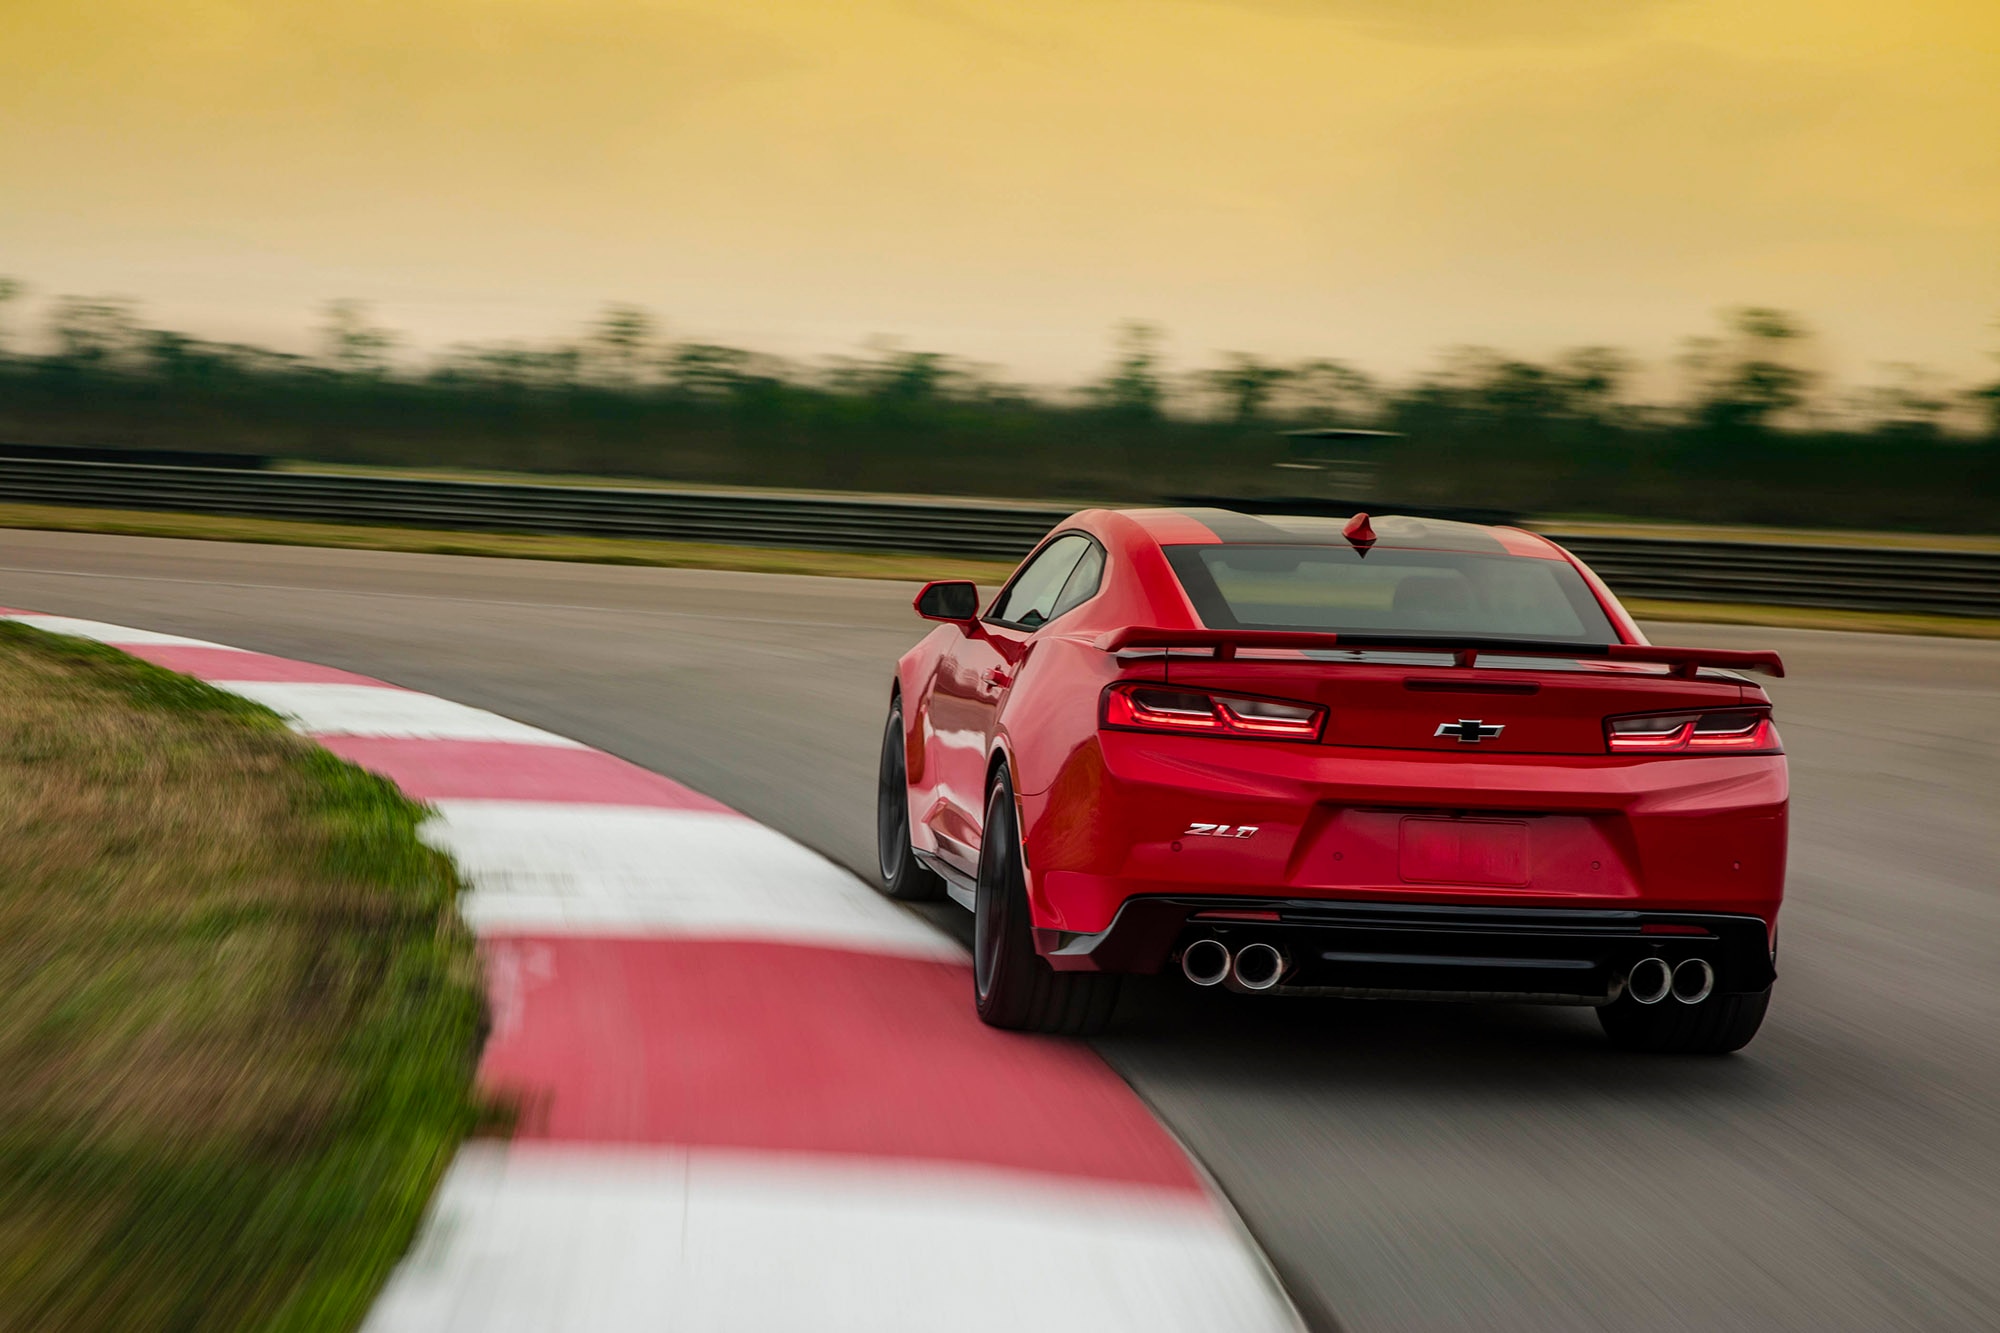 Red ZL1 Camaro driving on race track